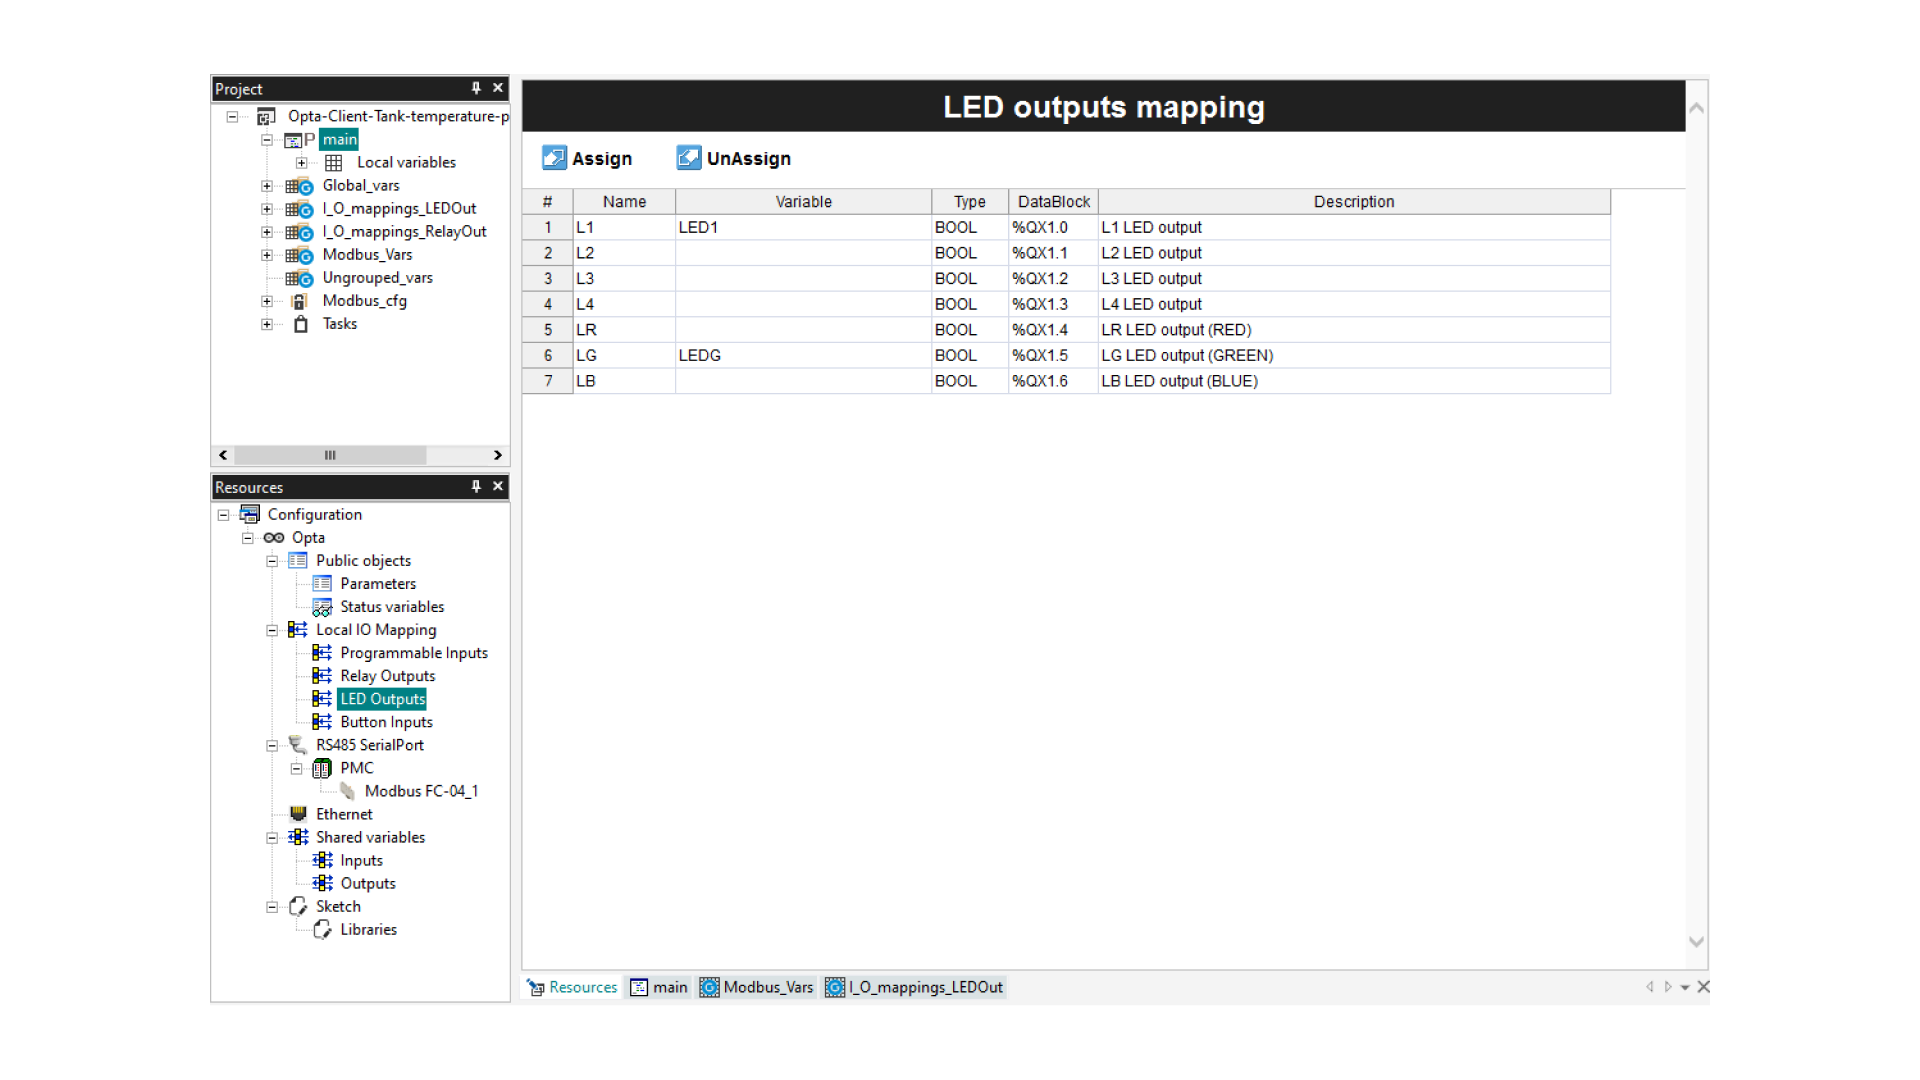 LED Outputs Mapping